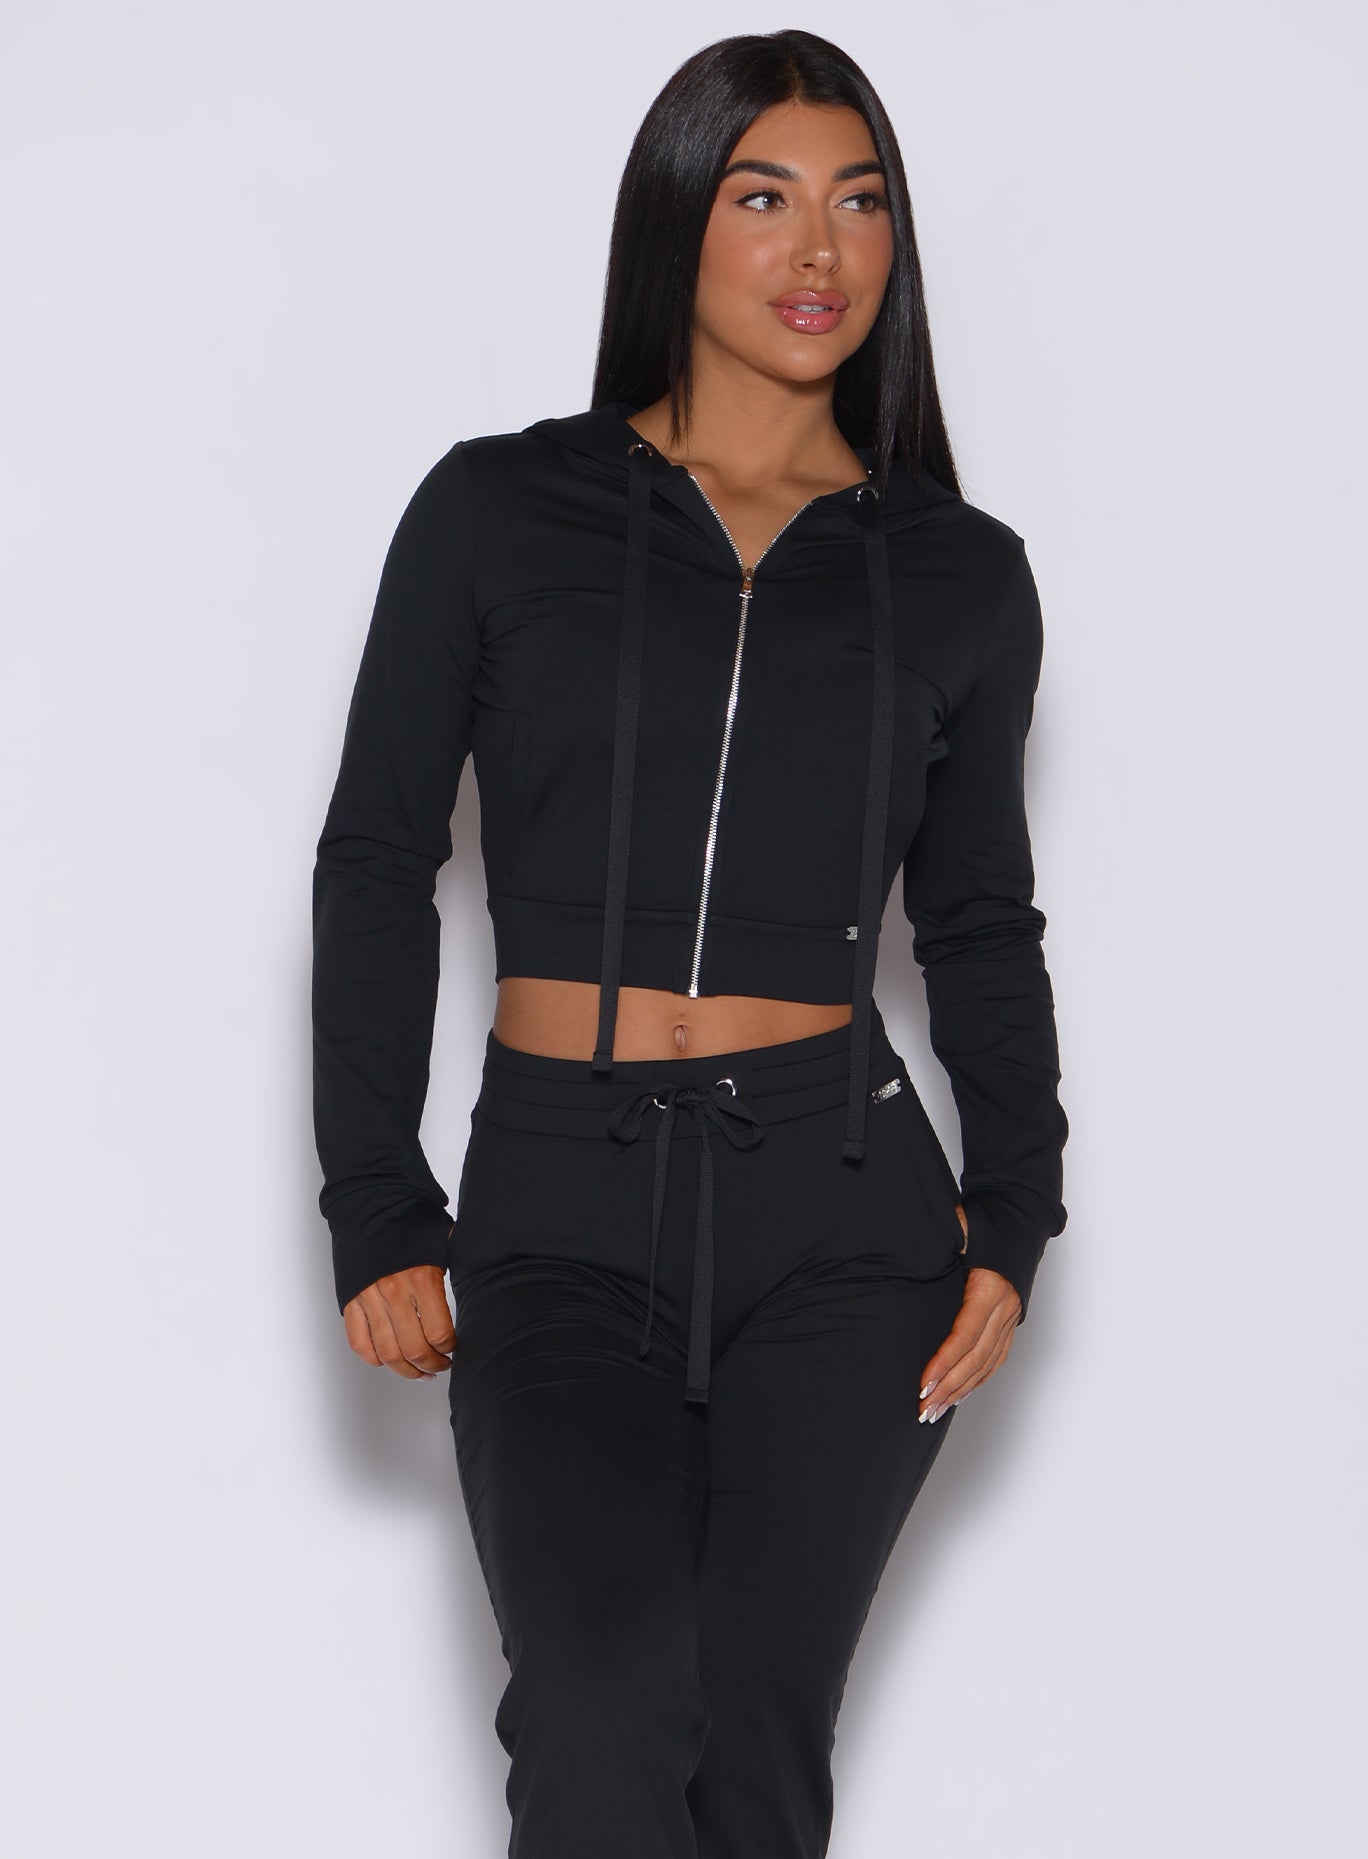 front view of model wearing the signature jacket in black